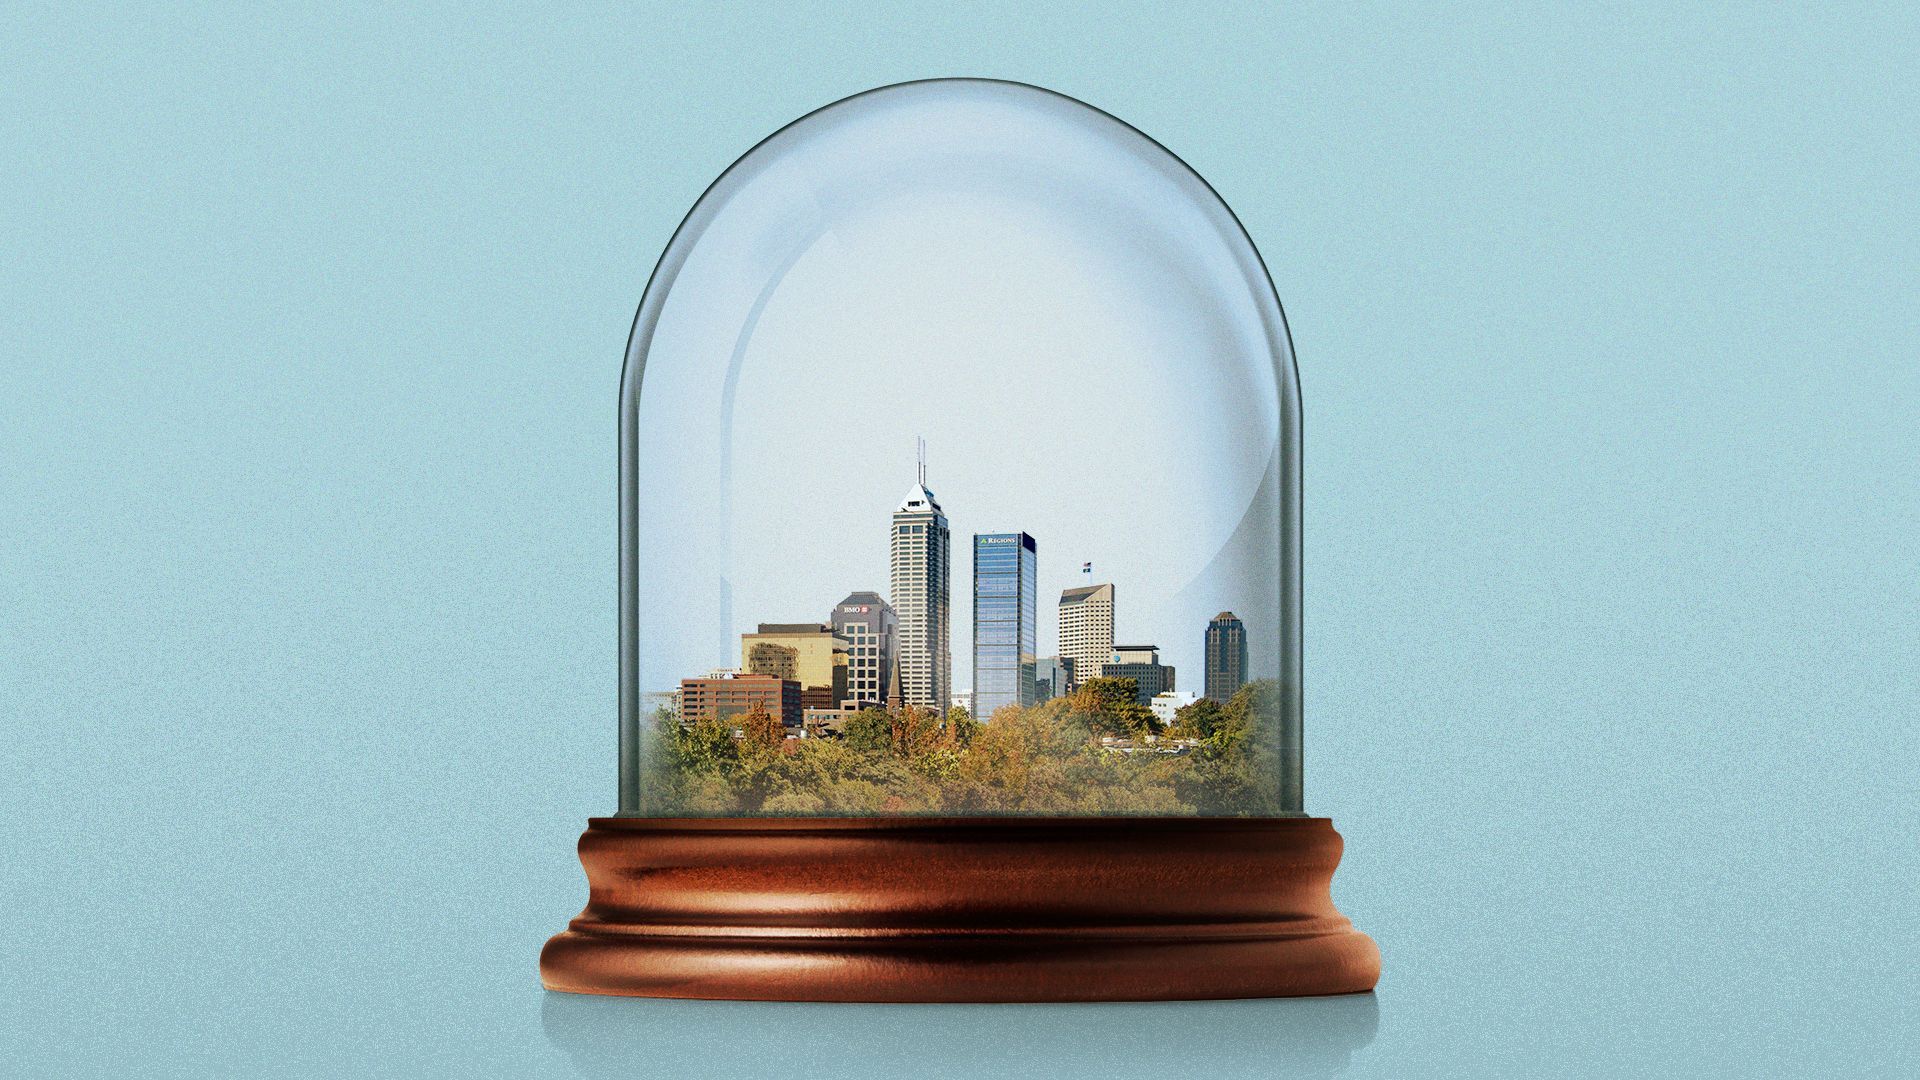 Illustration of the Indianapolis skyline inside of a glass jar.